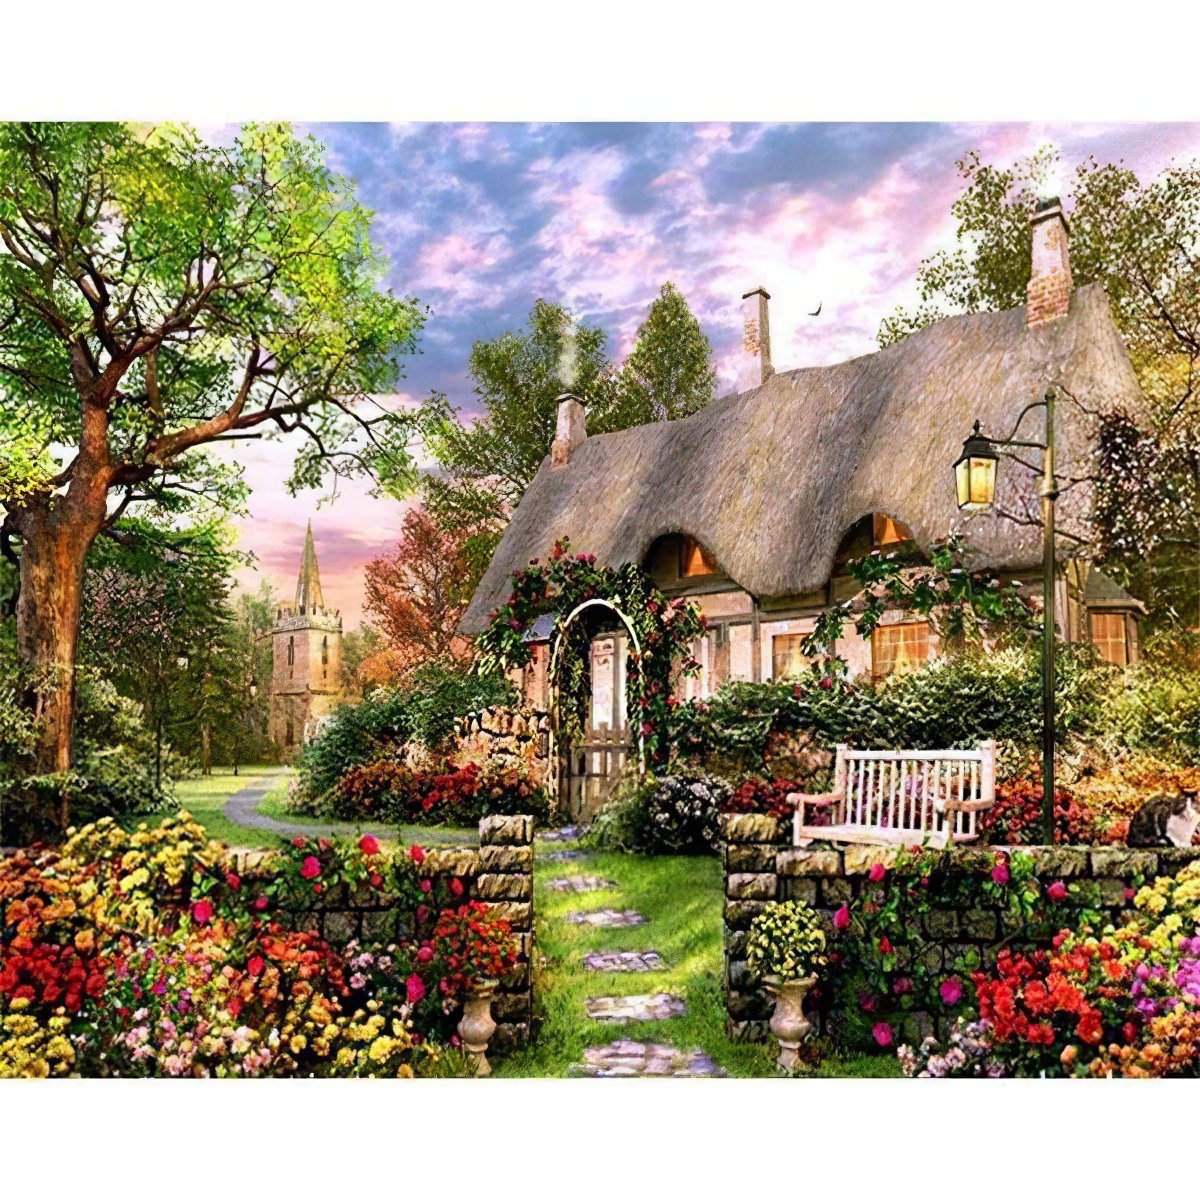 Cherish peaceful garden vibes with Cottage And Garden diamond art. Cottage And Garden - Diamondartlove